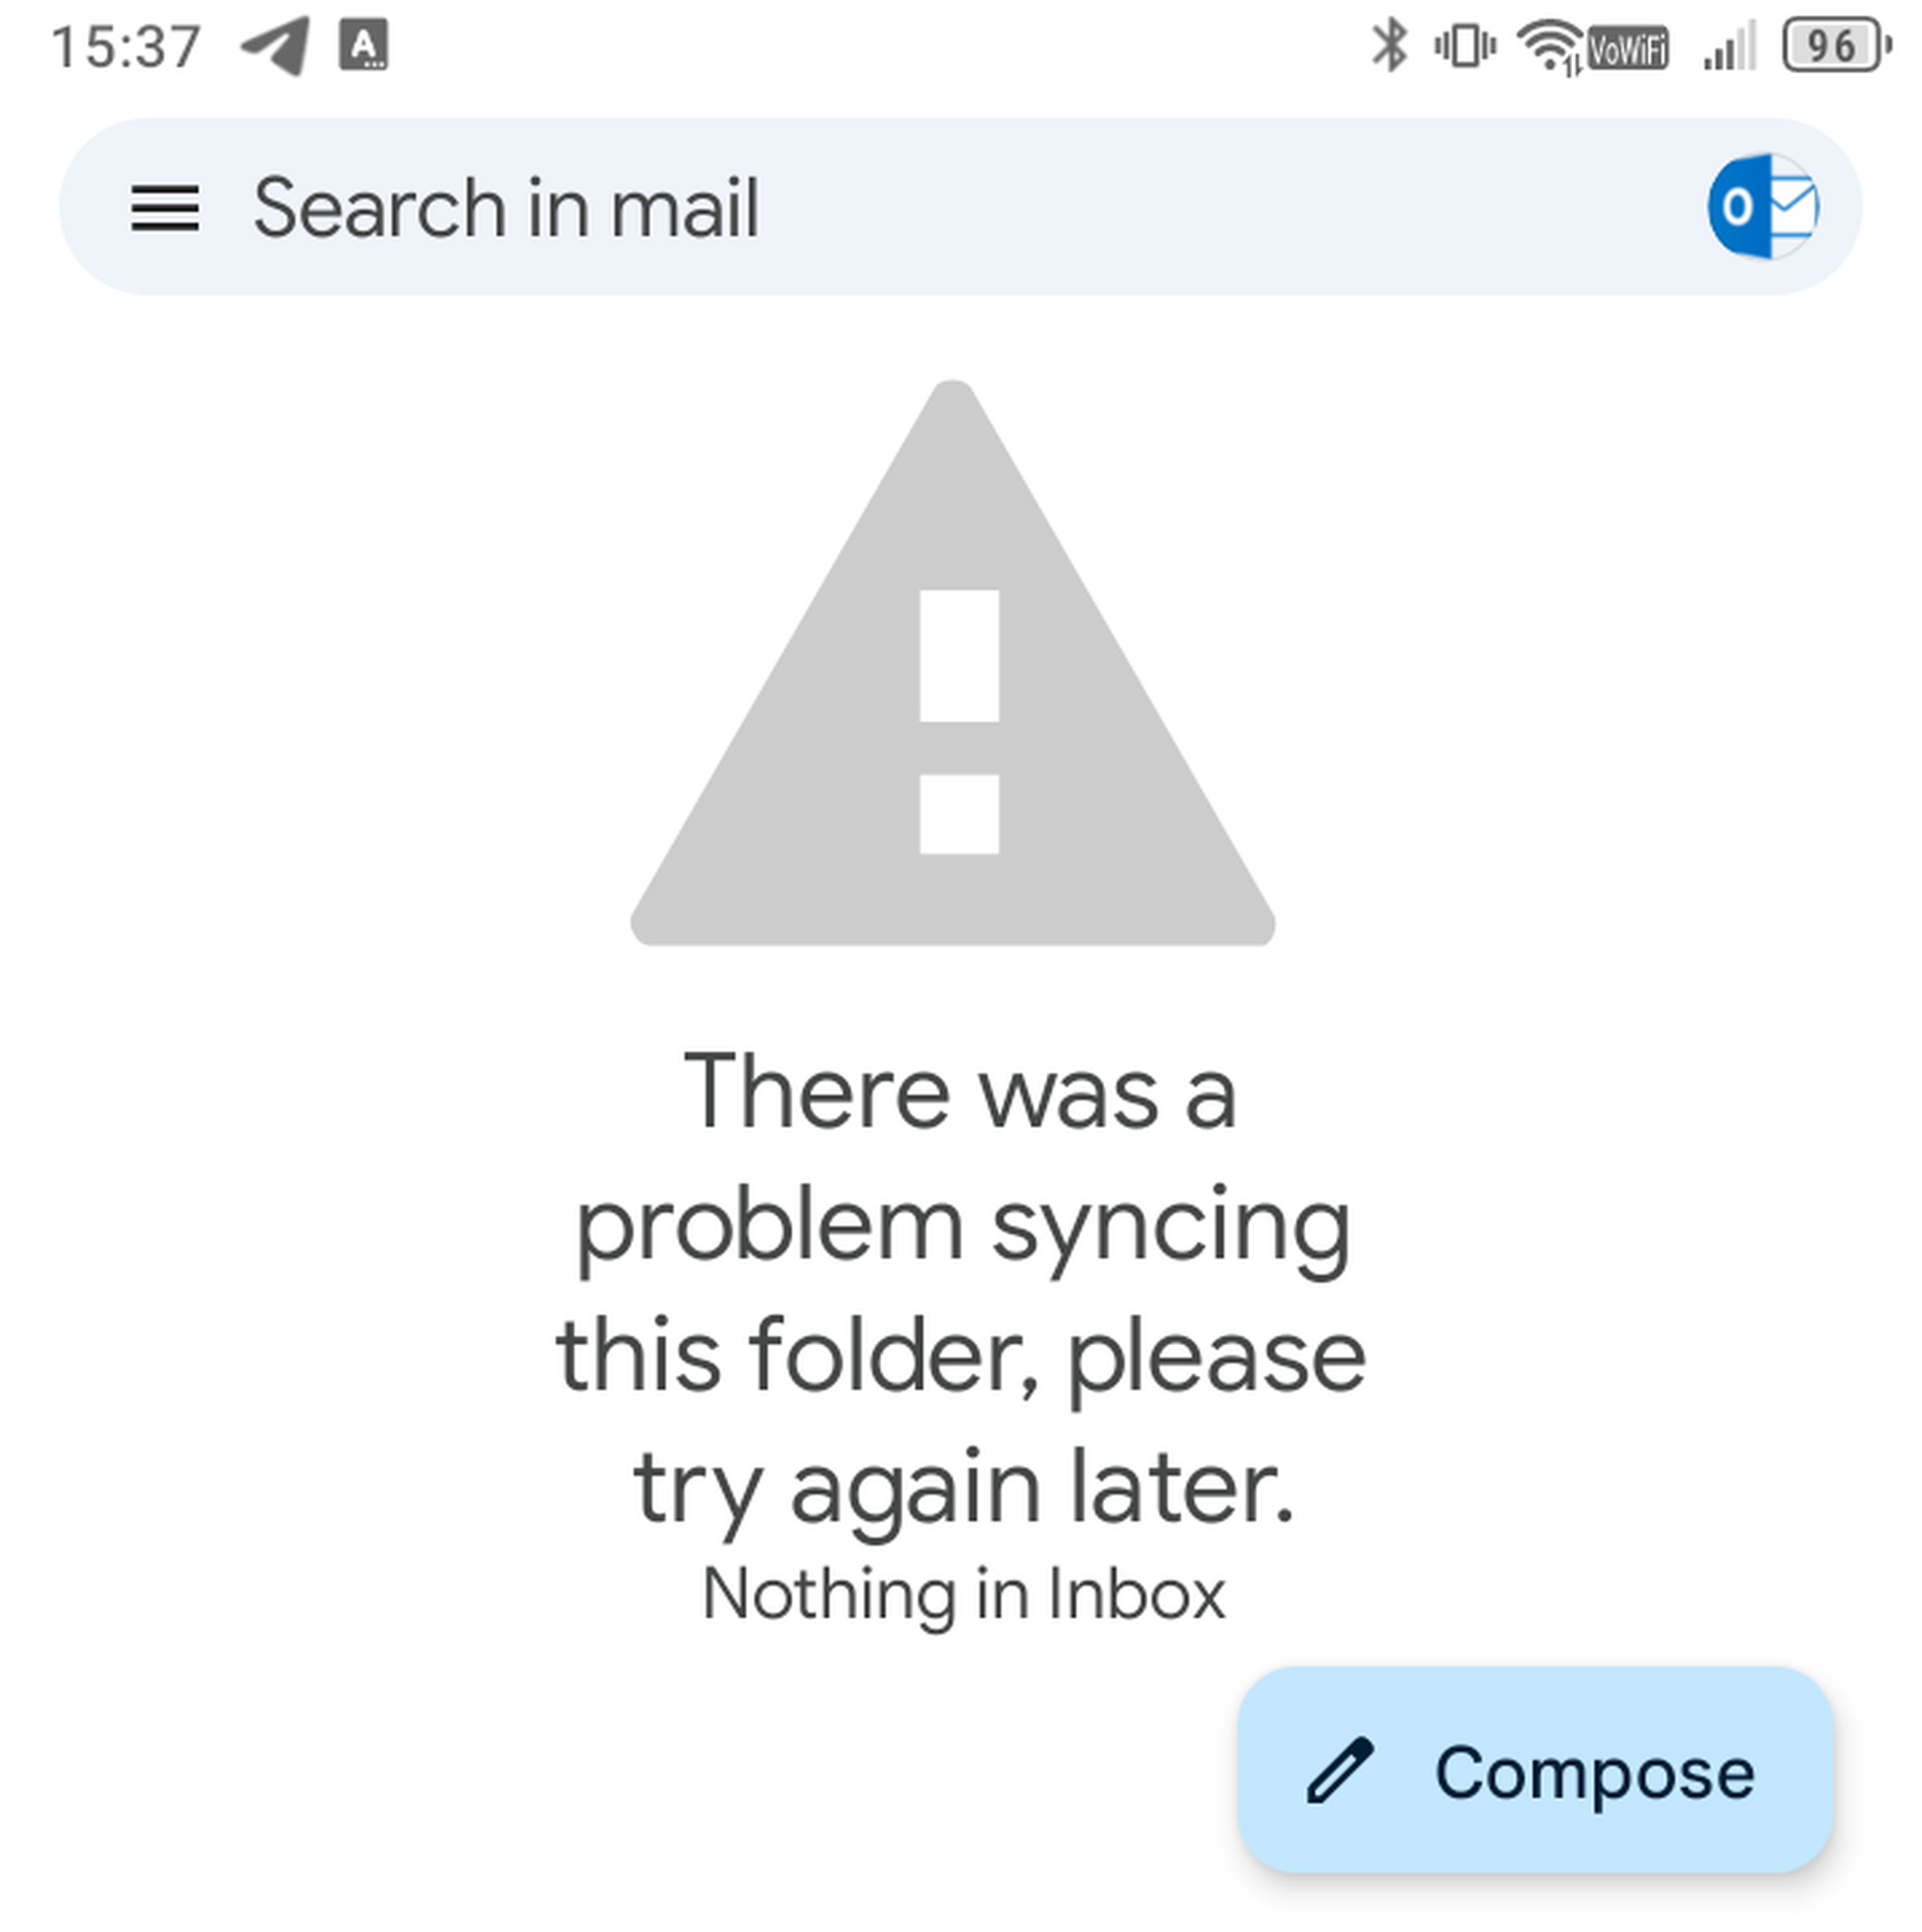 Screenshot showing an error message with an exclamation mark and the text: “There was a problem syncing this folder, please try again later. Nothing in Inbox.”